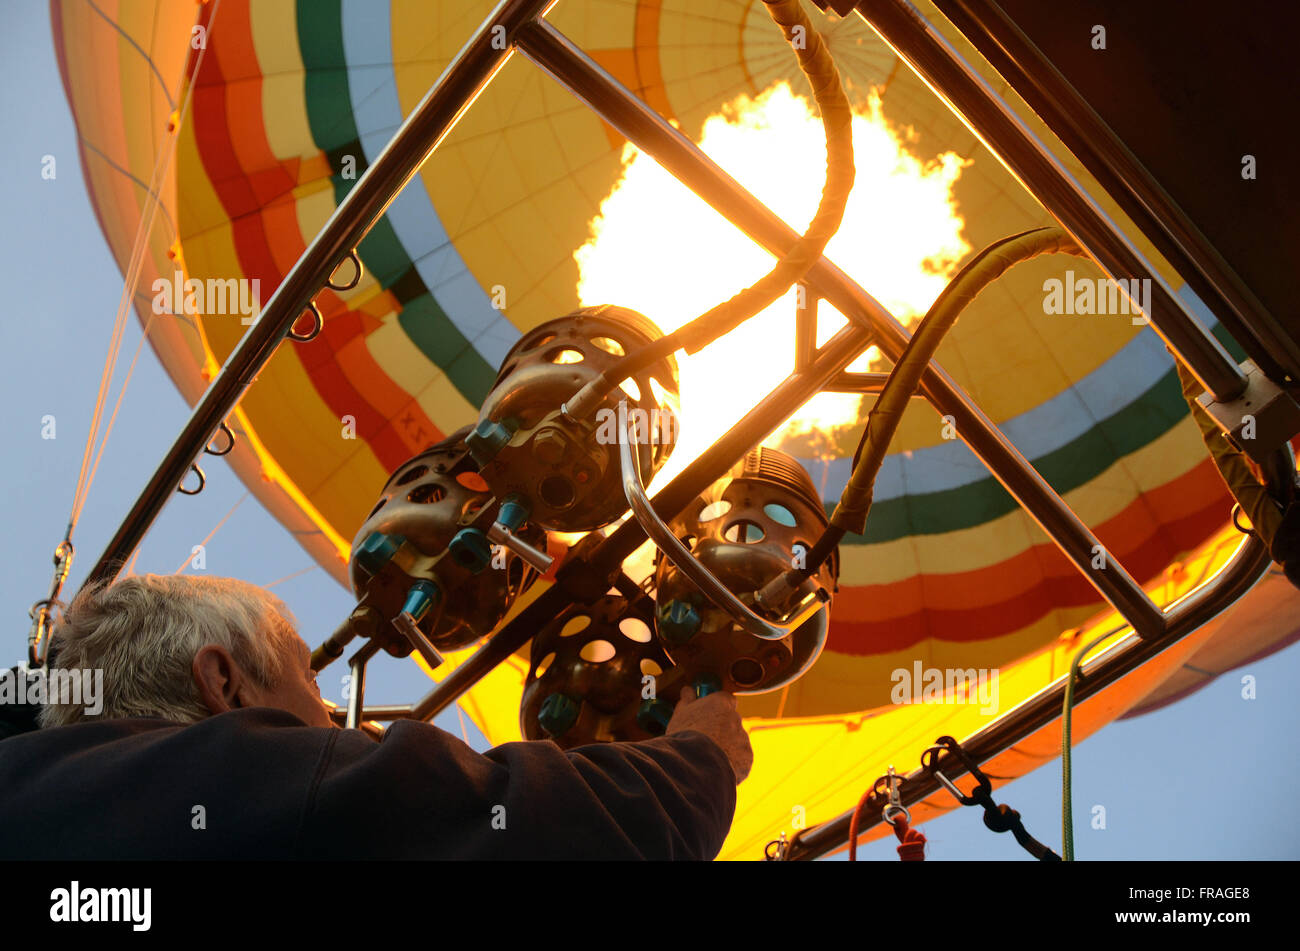 Pilot triggering device to inflate balloon flight for tourism in the Maasai Mara National Reserve Stock Photo